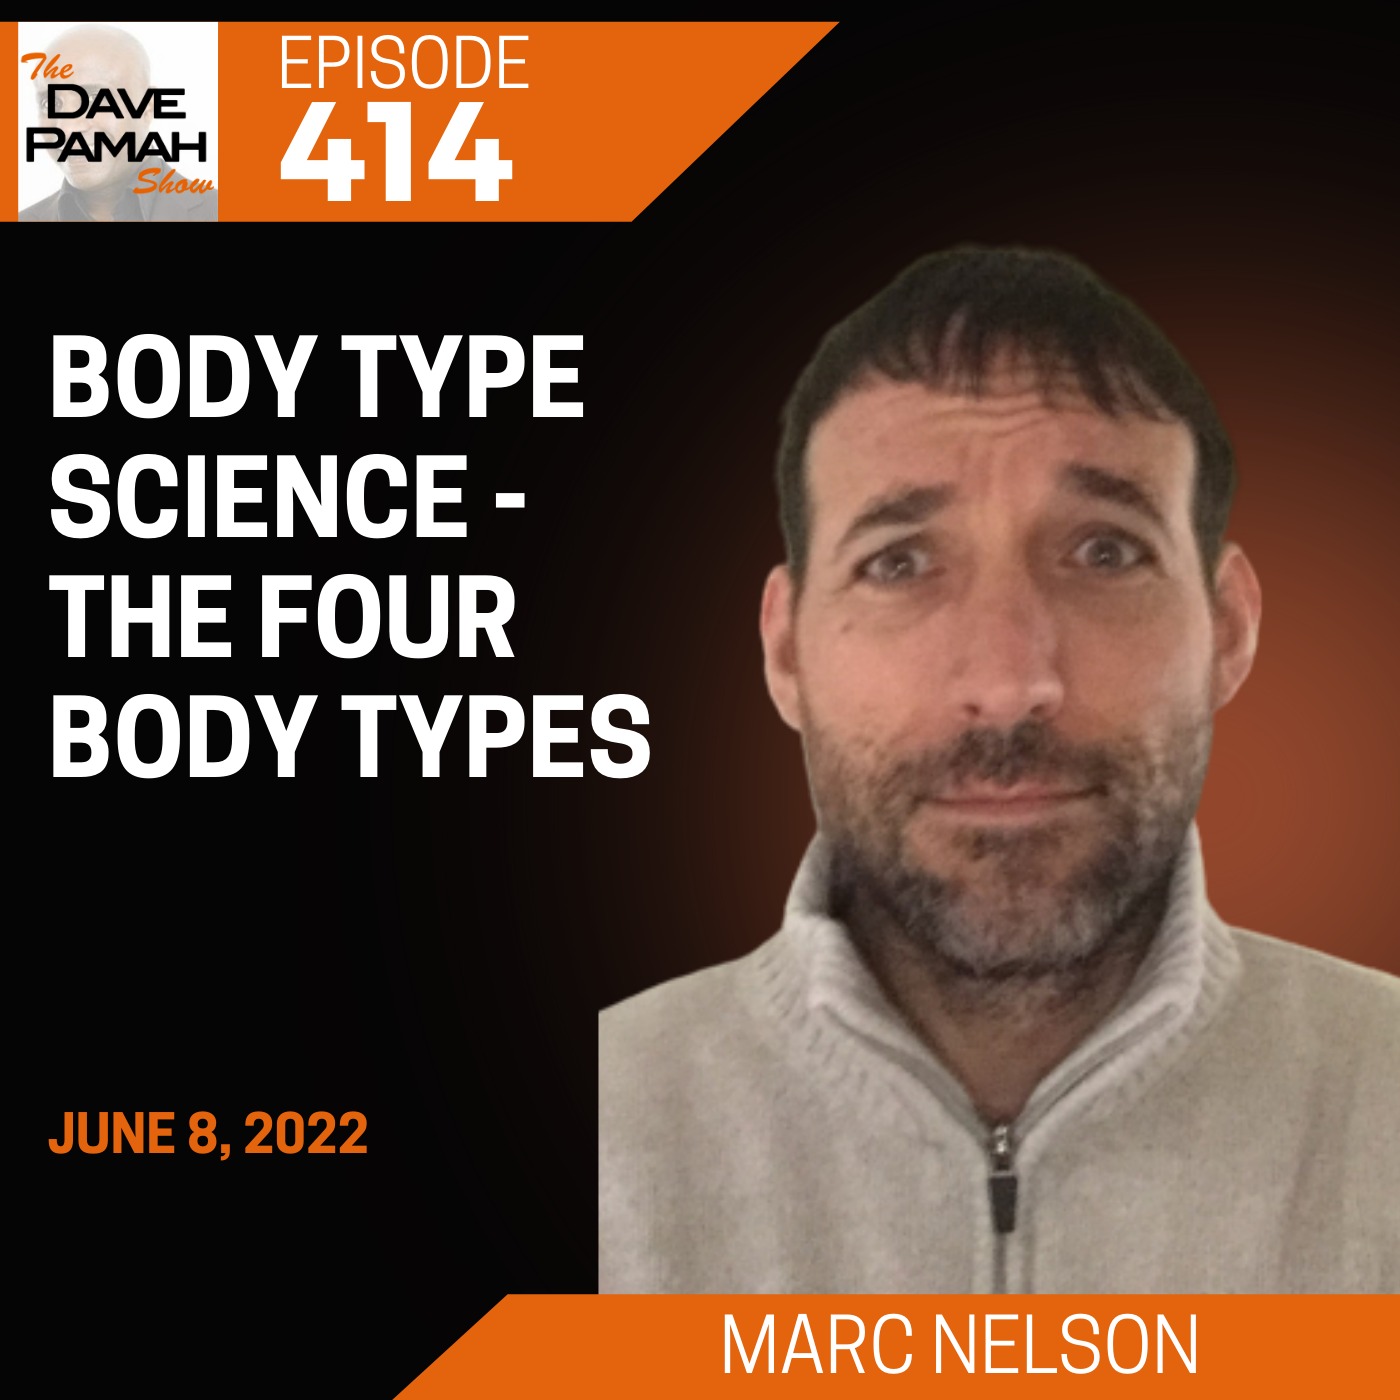 Body Type Science - The Four Body Types with Marc Nelson